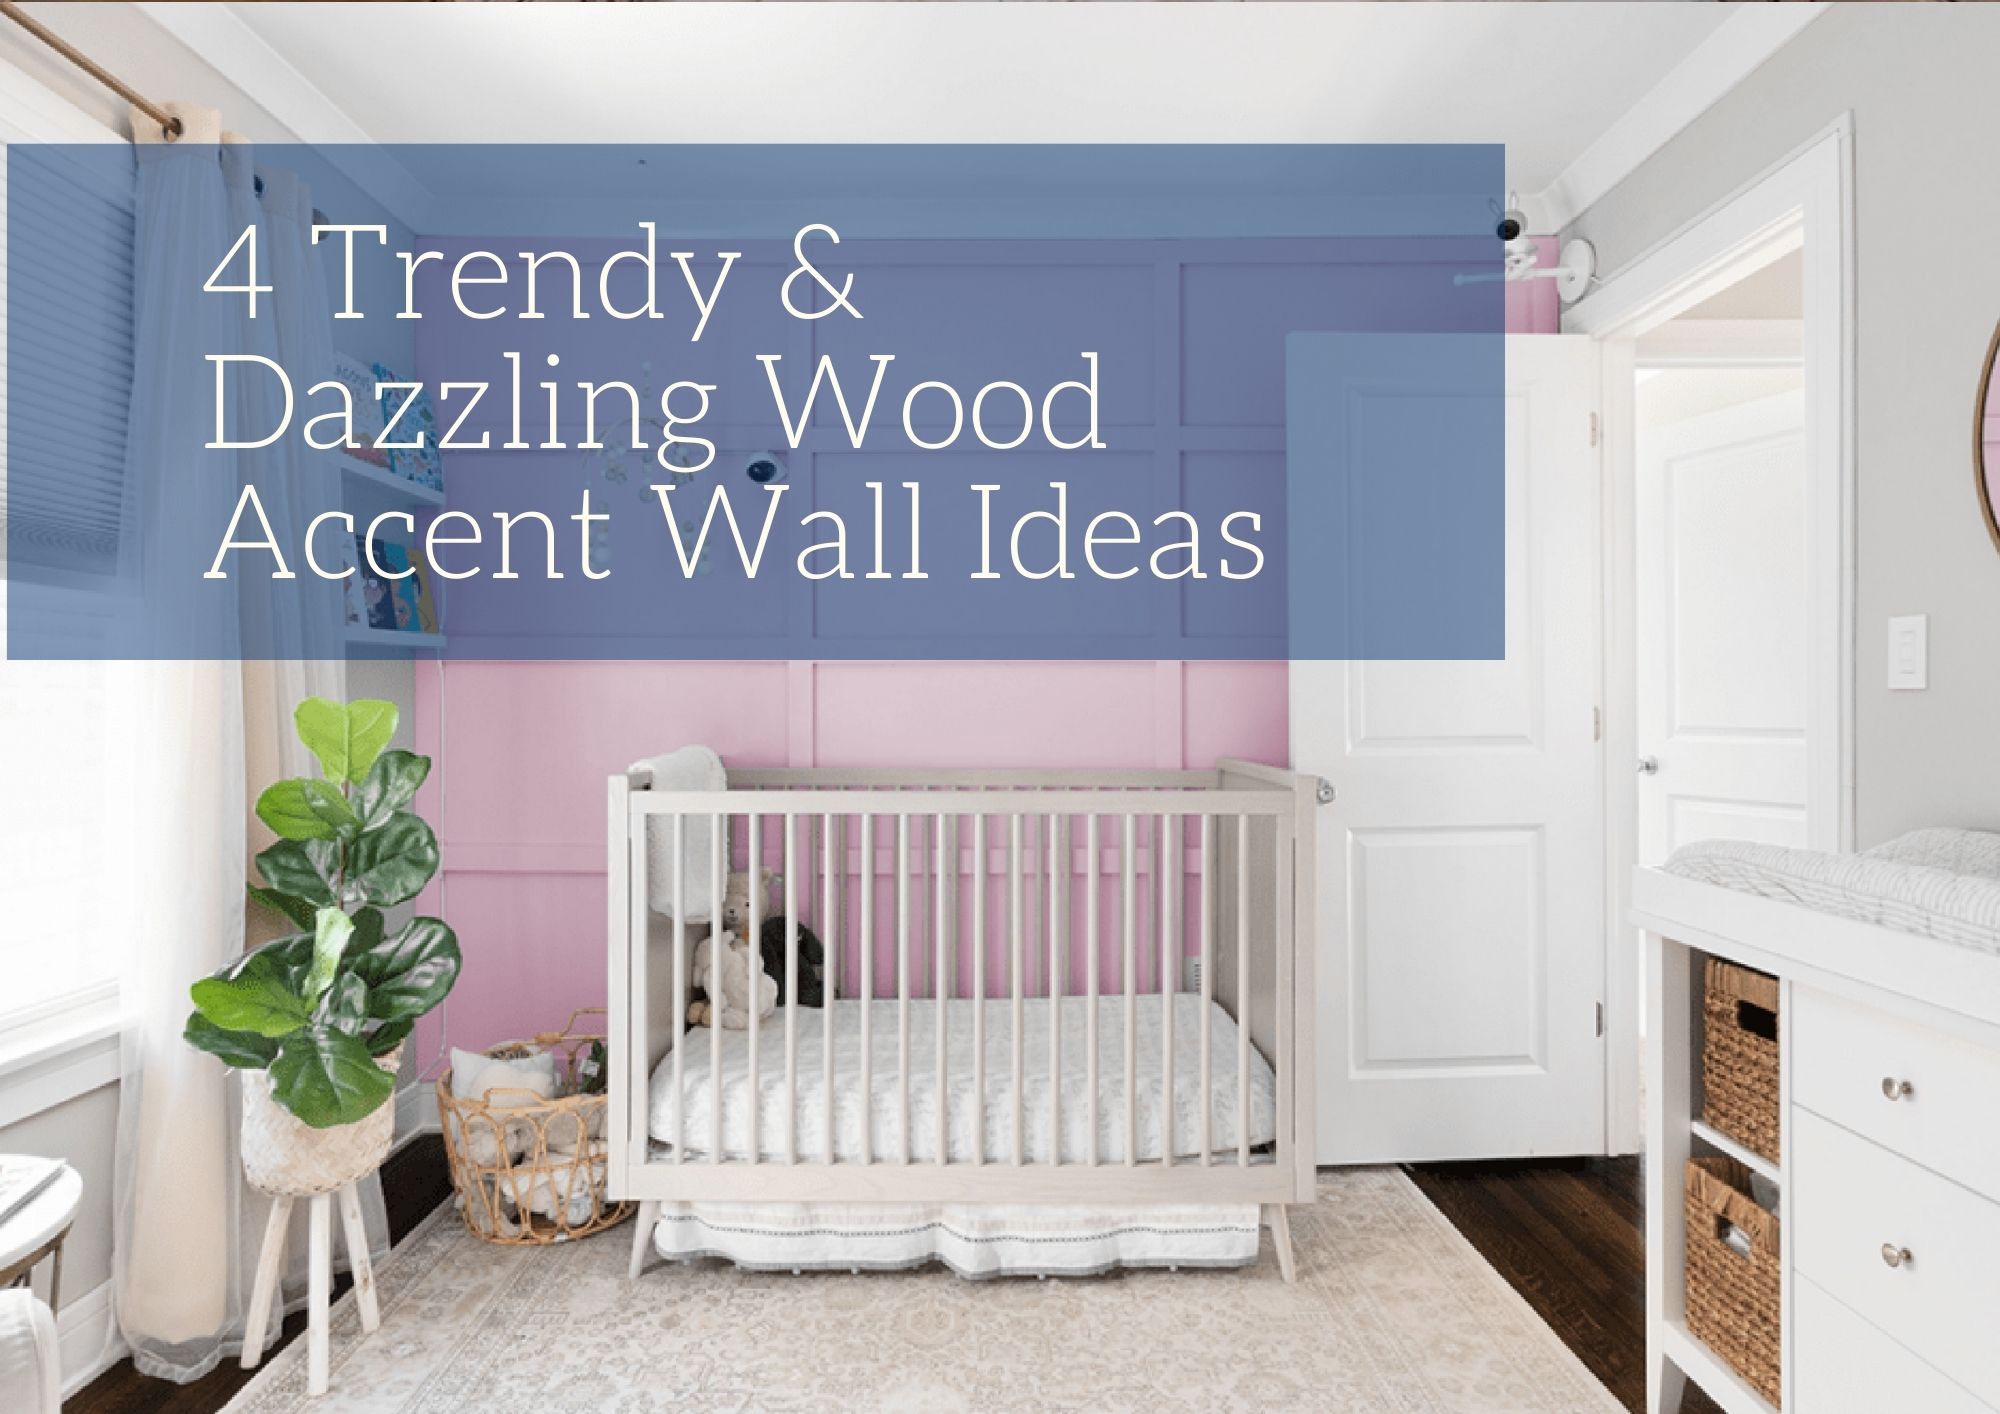 4 Trendy & Dazzling Wood Accent Wall Ideas